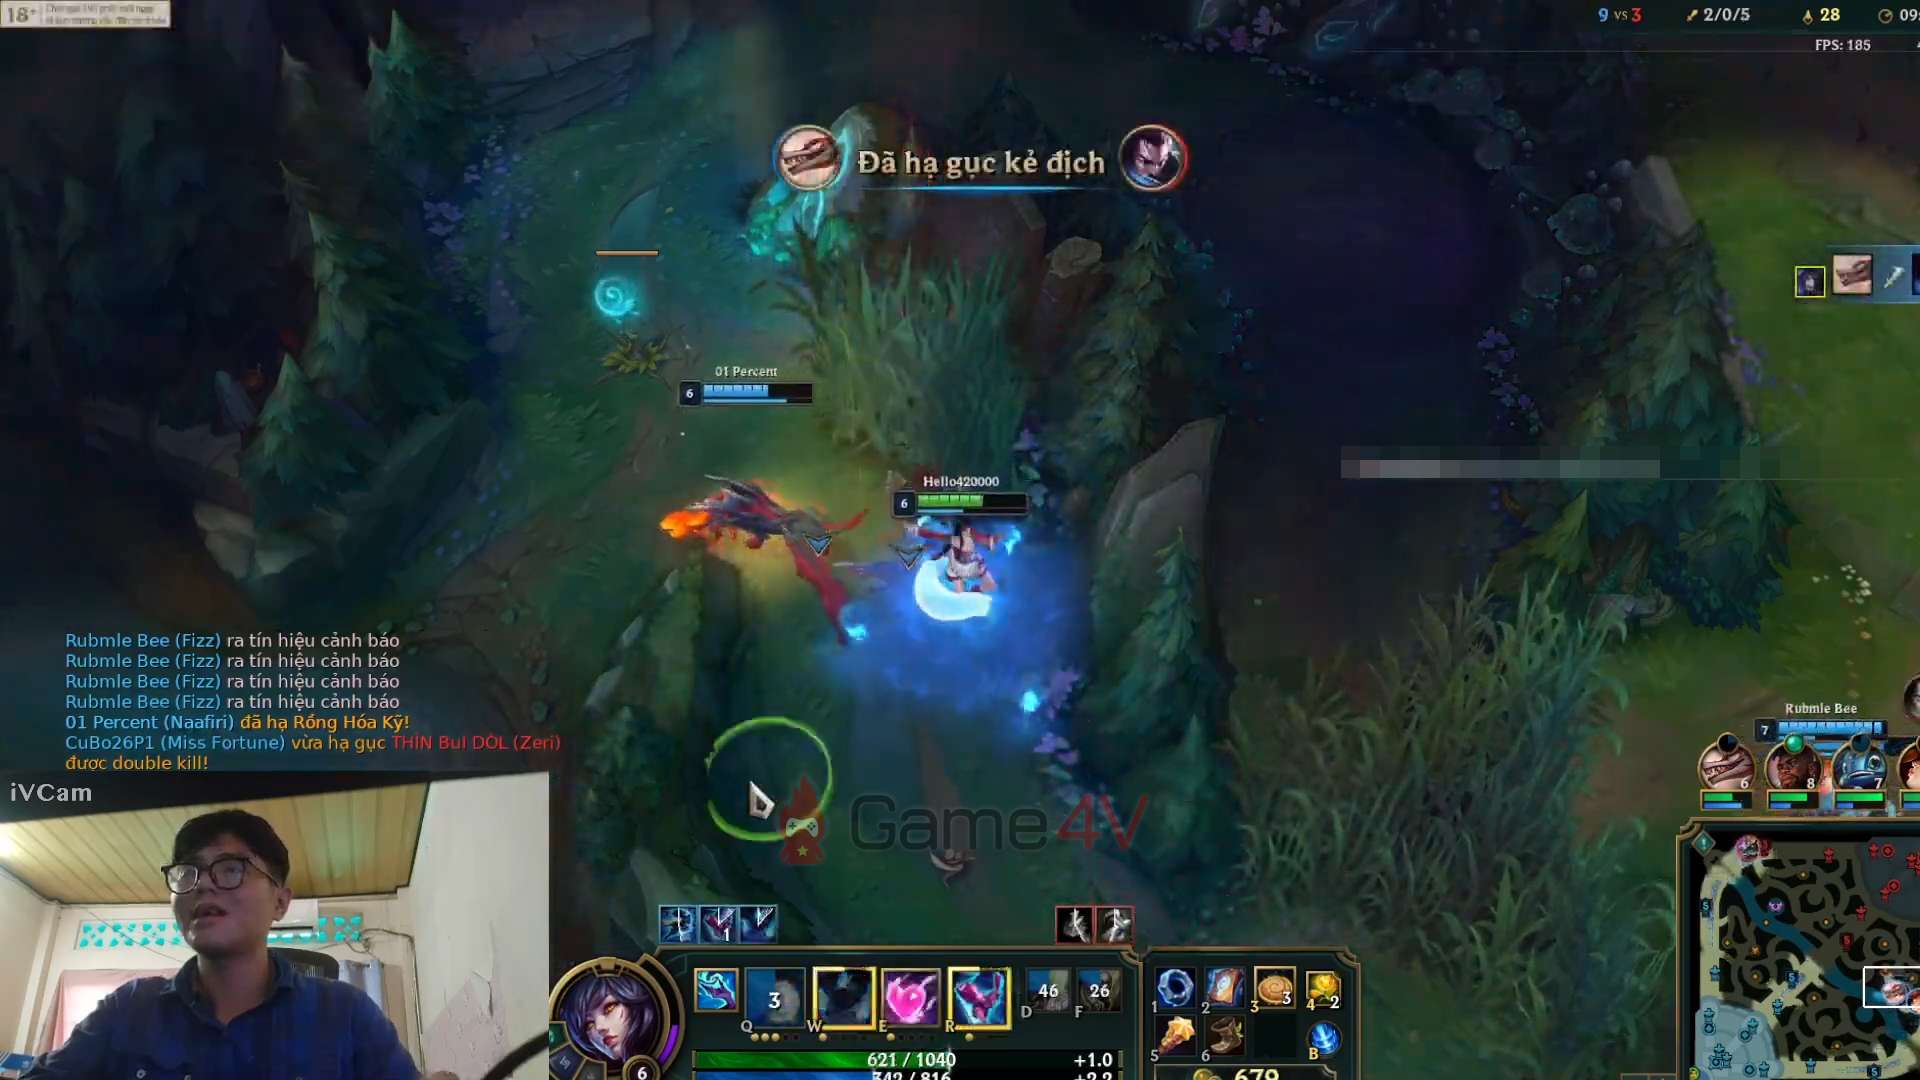 Tommy Teo appeared on livestream and played League of Legends.